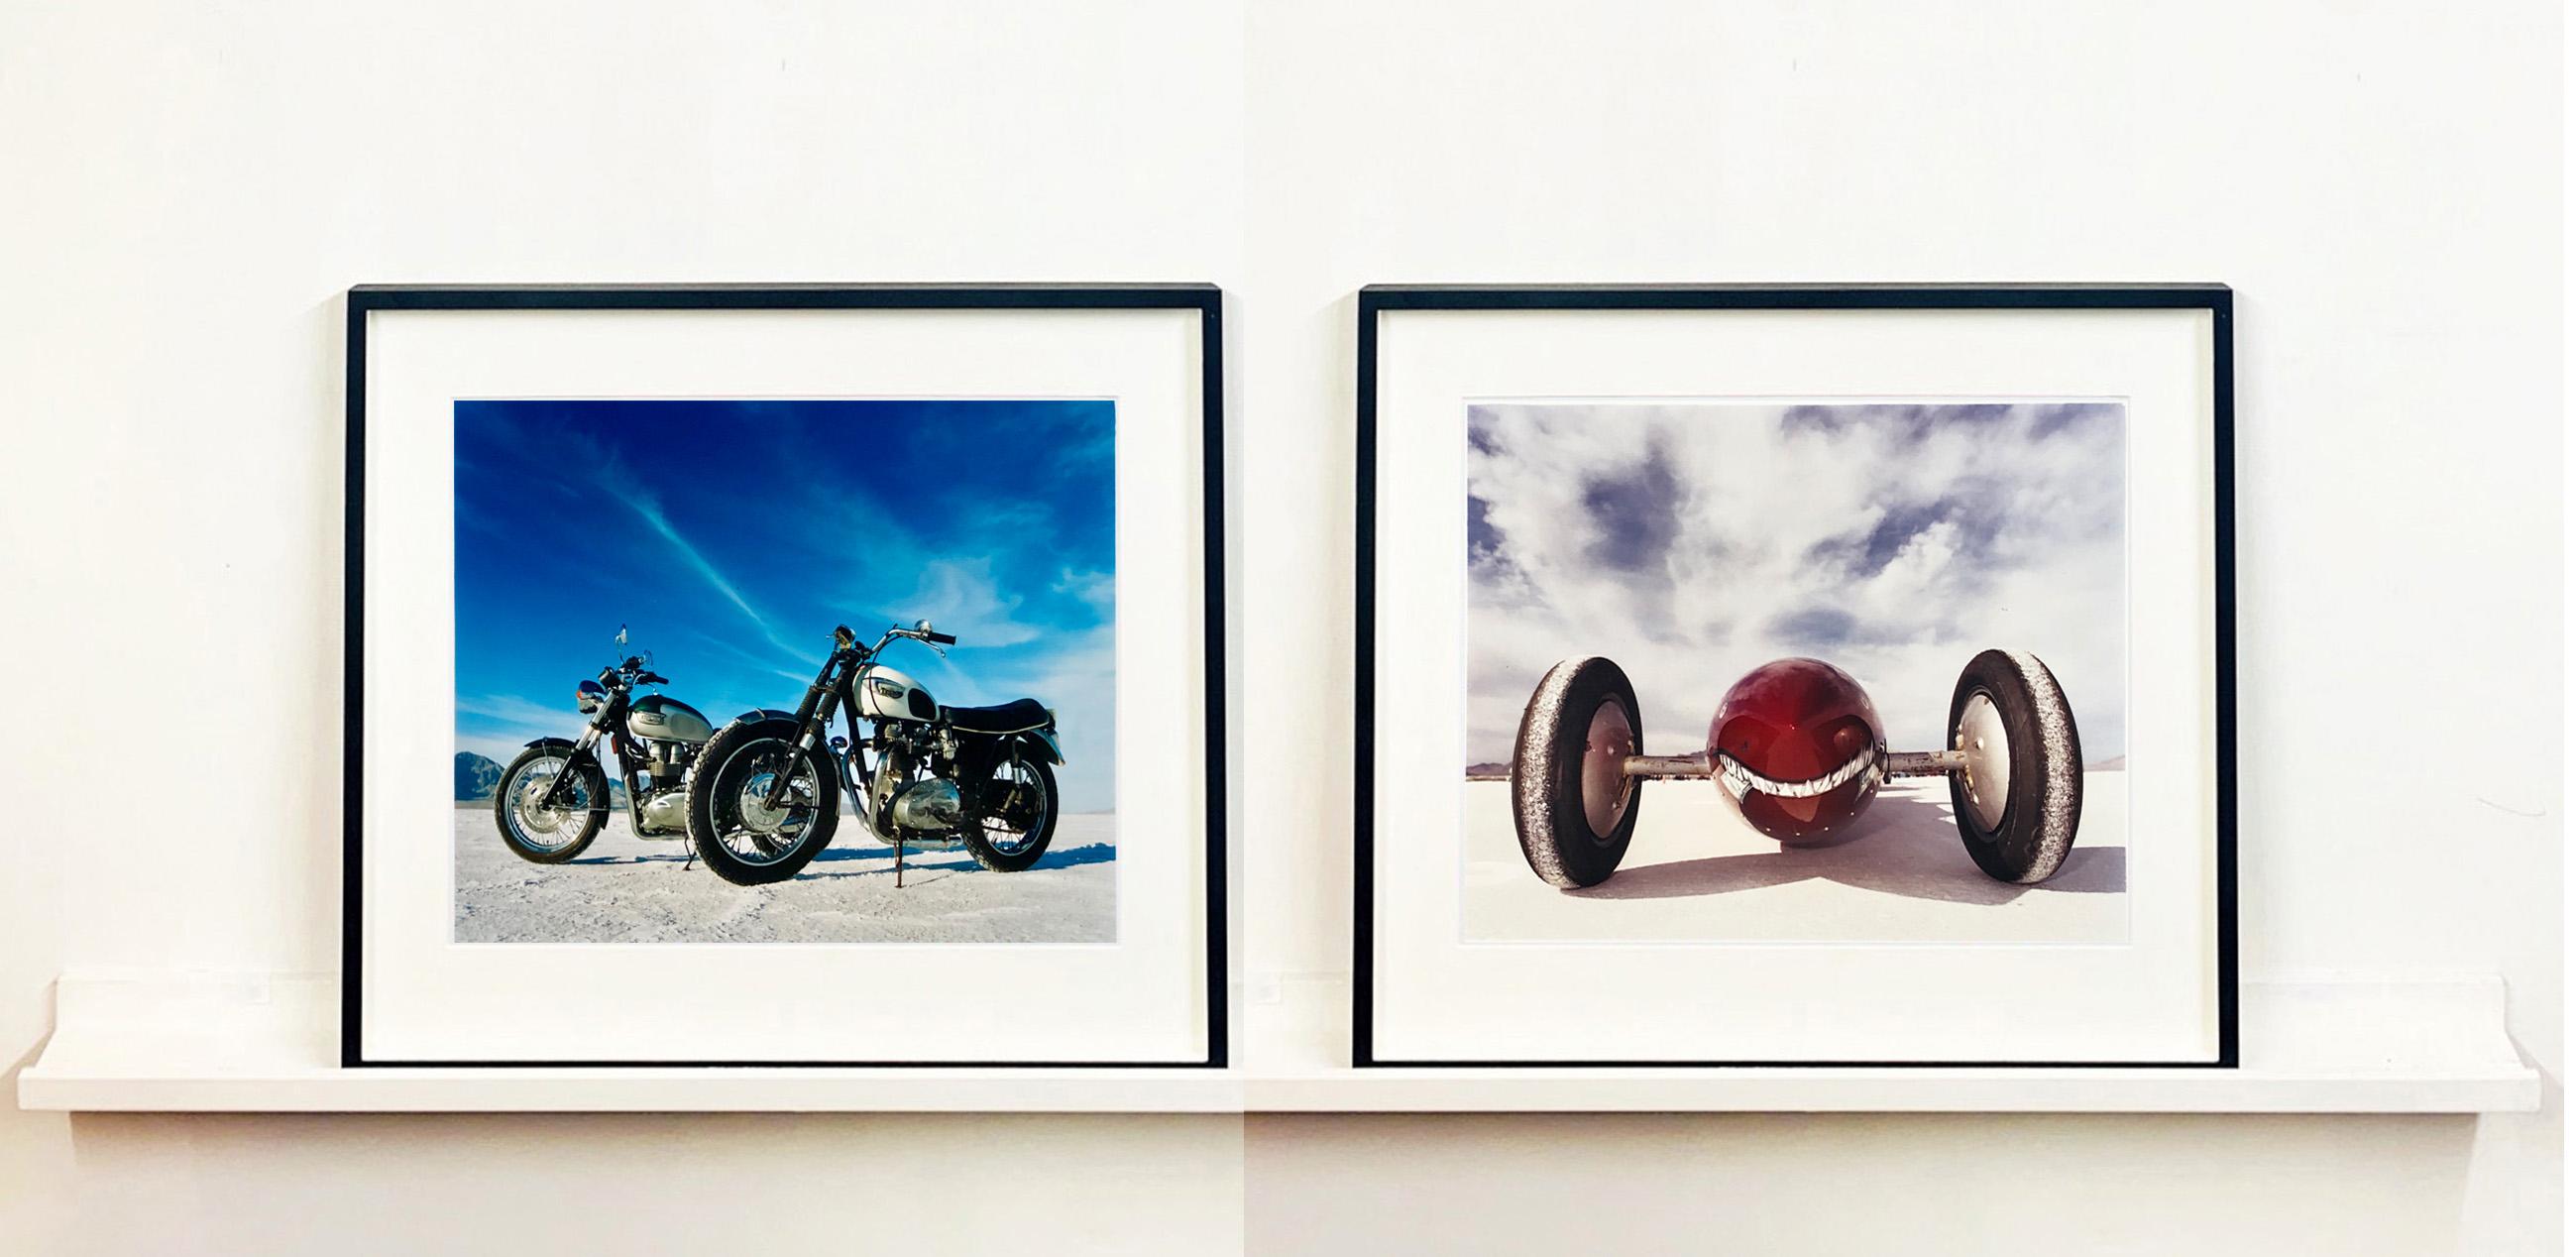 Two Bonnerville Motorcycles, captured in the iconic home of speed, Bonneville Salt Flats. Set against the bold blue sky in Utah.

This artwork is a limited edition of 25 gloss photographic print made in the artist's darkroom. It is signed and